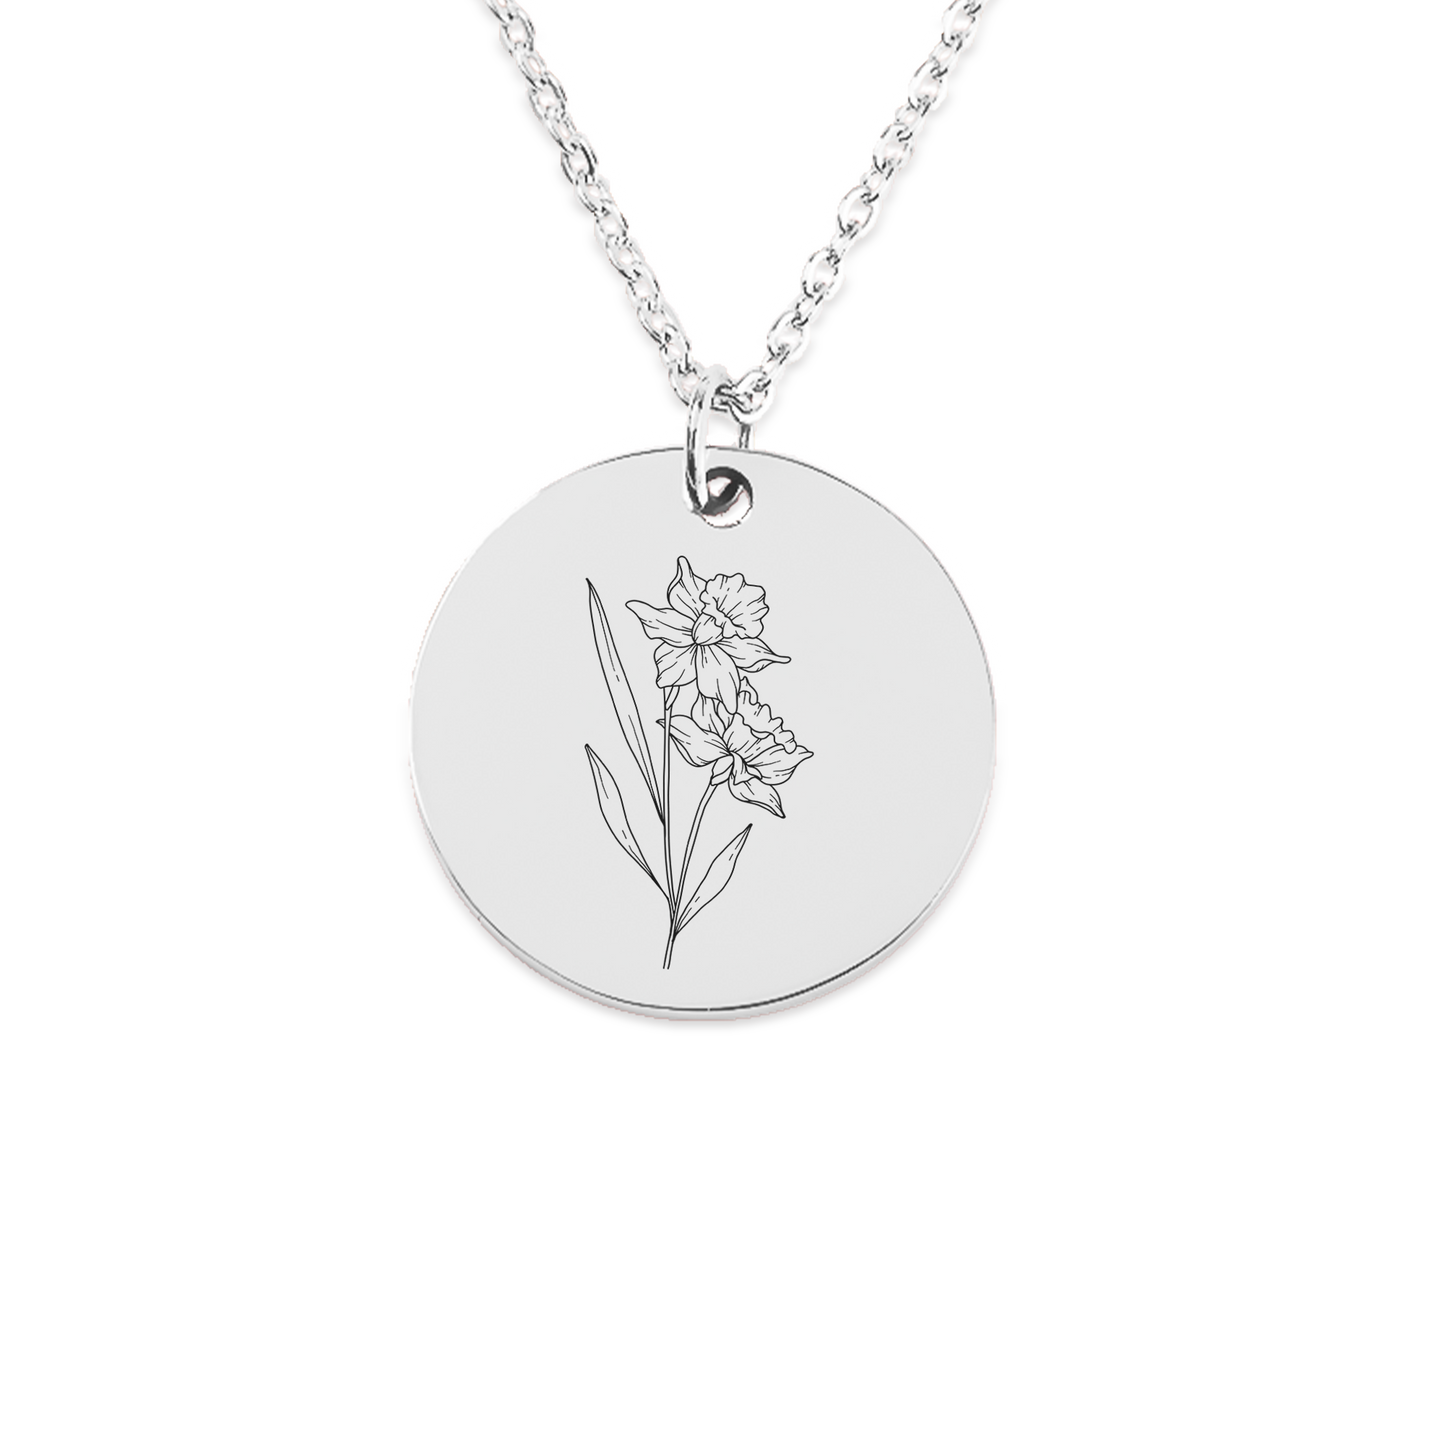 March Birth Flower Coin Necklace (Daffodil)